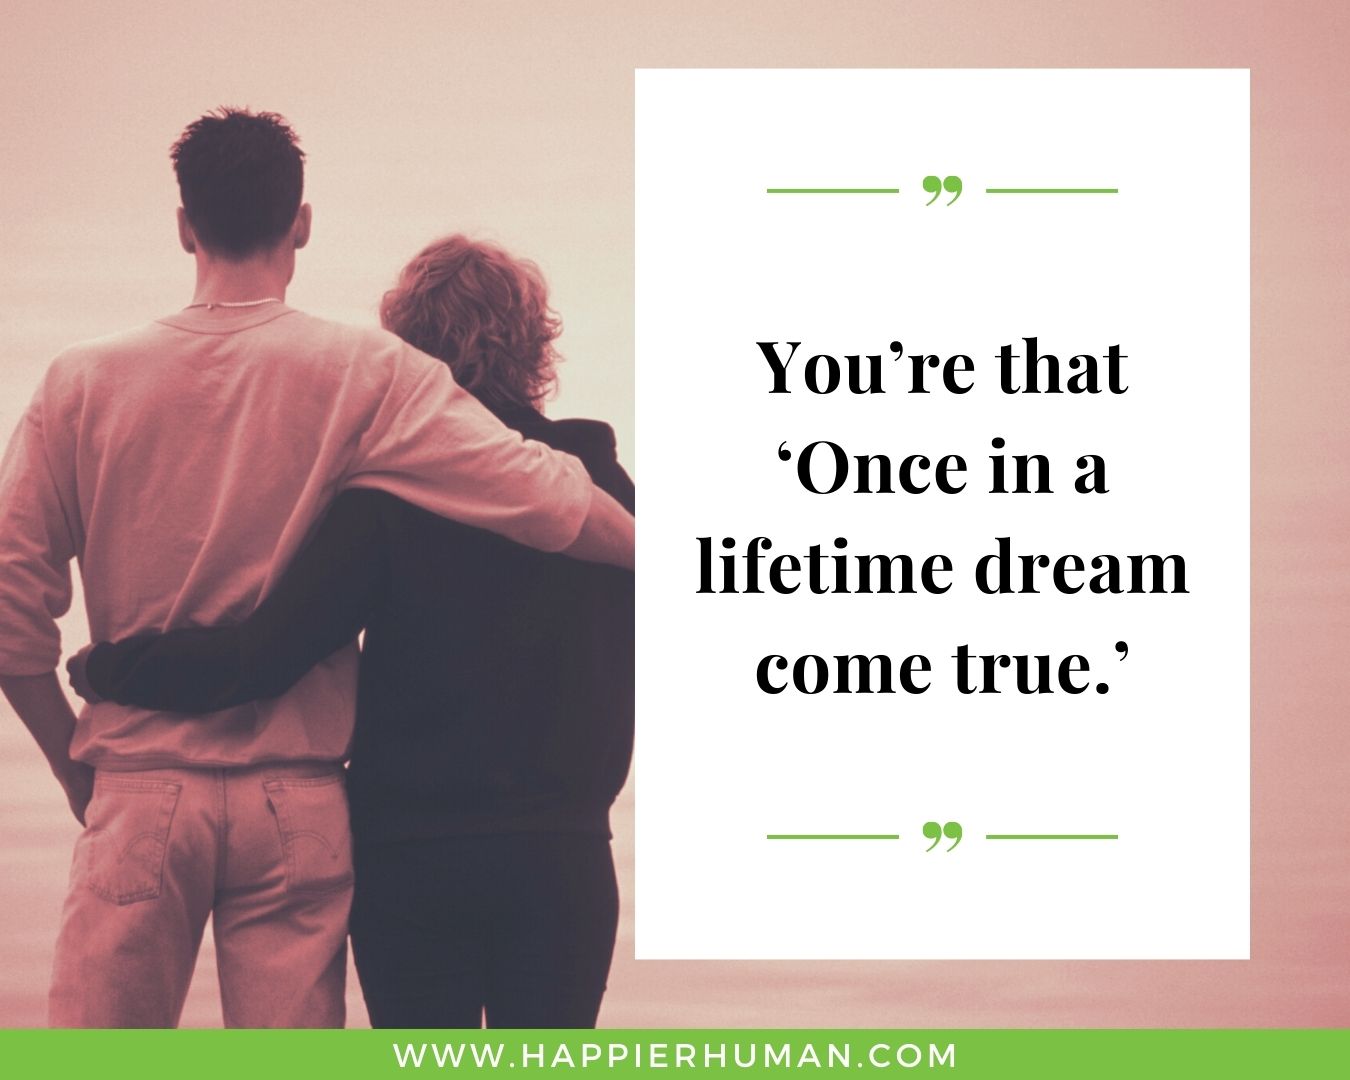 Life and love quotes - “You’re that ‘Once in a lifetime dream come true.’”